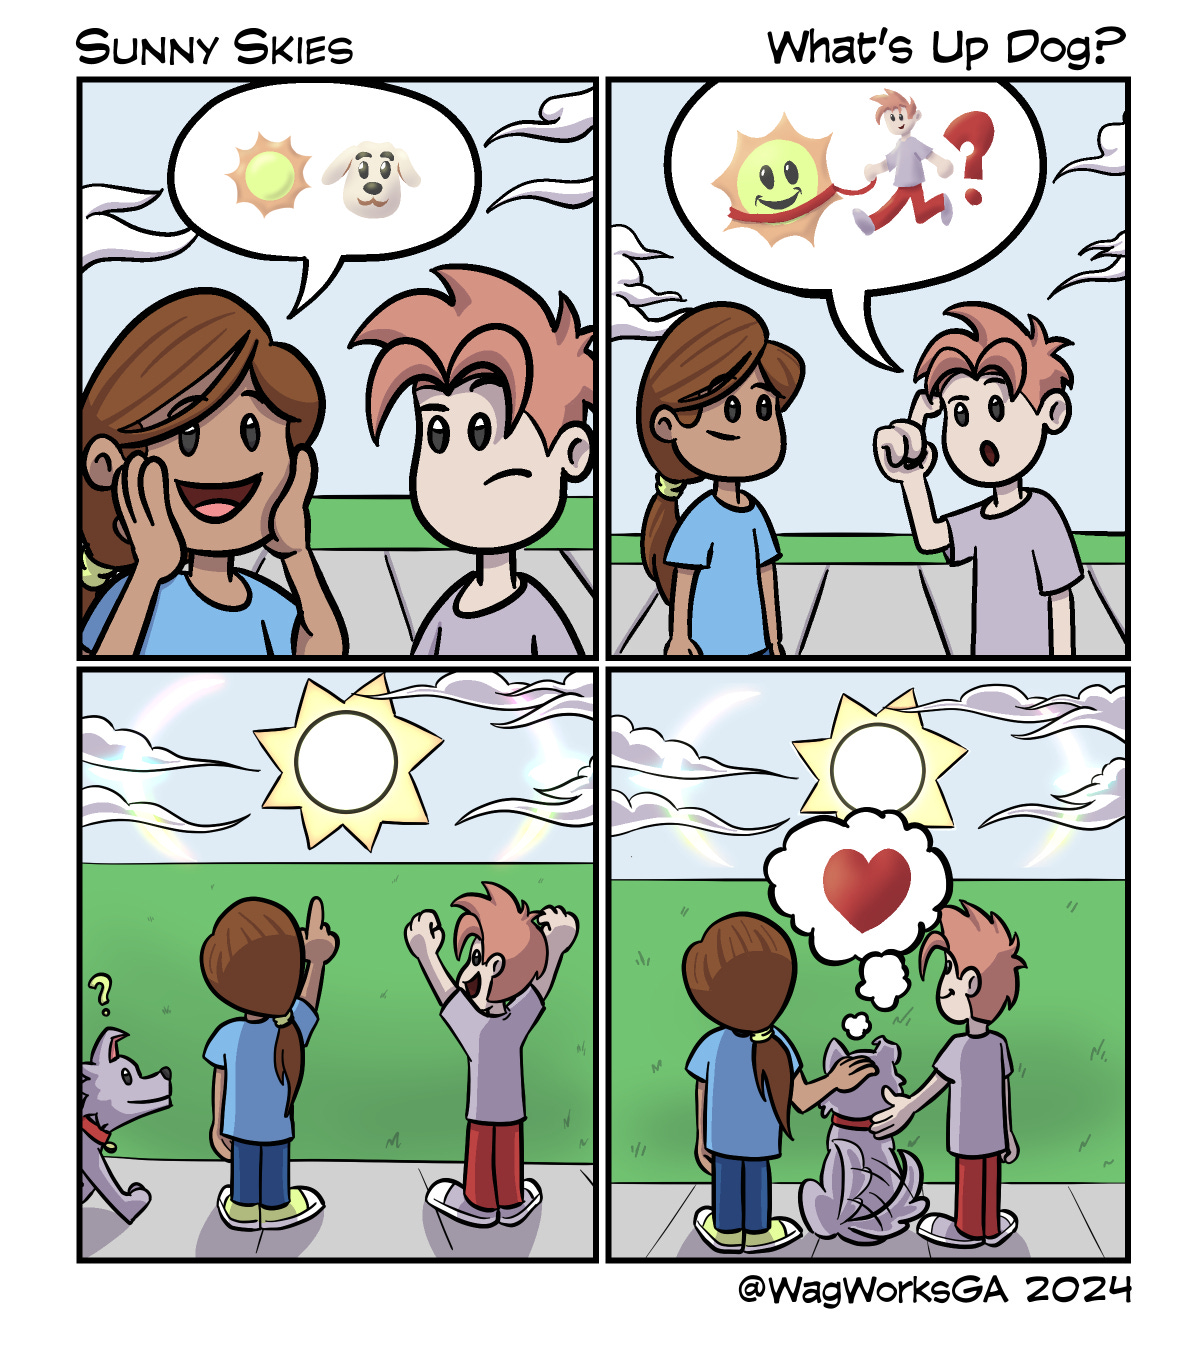 Chloe sees a sun dog! Corey is unsure of what a sun dog is, so she shows him. In the final panel, a sweet dog joins the two children in observing the sun dog in the sky. 